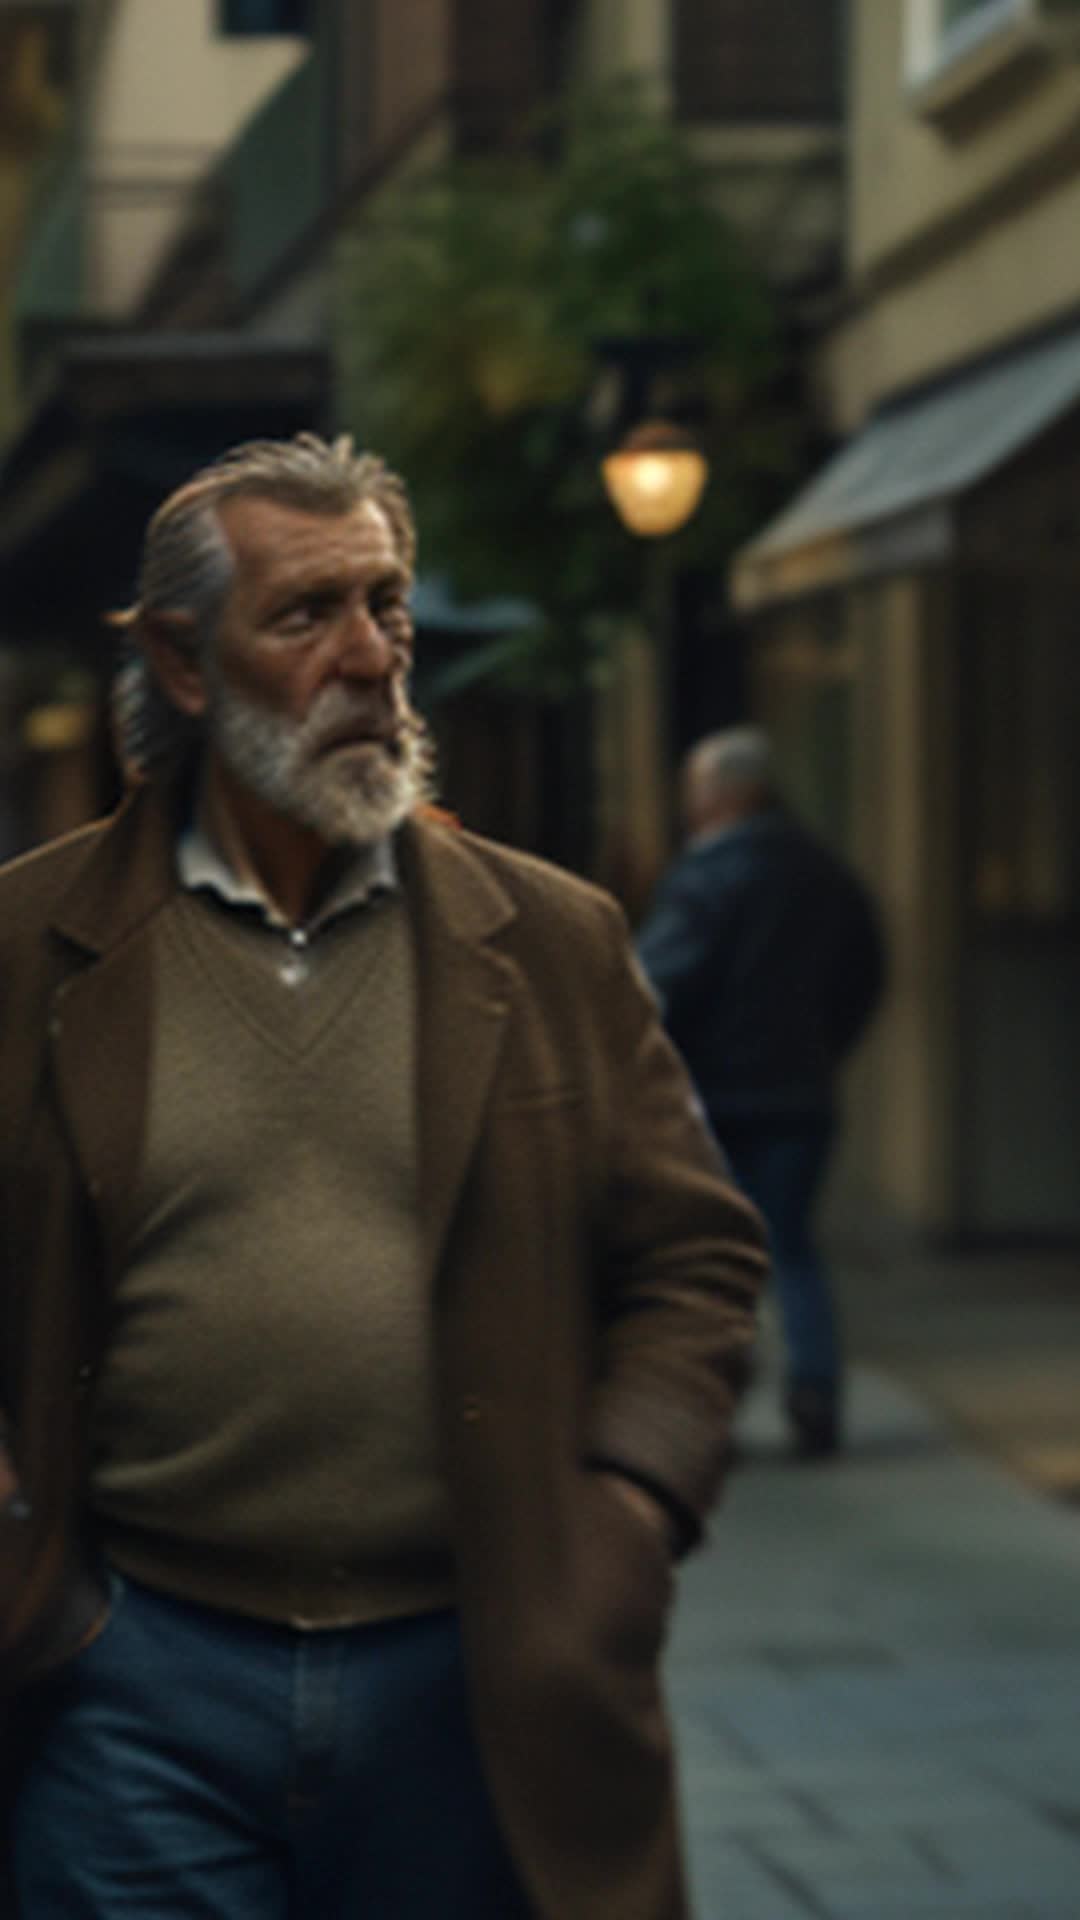 Middleaged man, rugged features, saltandpepper beard, wearing casual clothes, standing in urban setting, bustling city street, vintage brick buildings in background, soft shadows, natural light, detailed and sharp focus, dynamic movement, with people walking by, wideangle shot, city noise subtly fading in, ambient sounds of conversations and distant car horns, twilight setting, relaxed and contemplative mood, captured in cinematic style